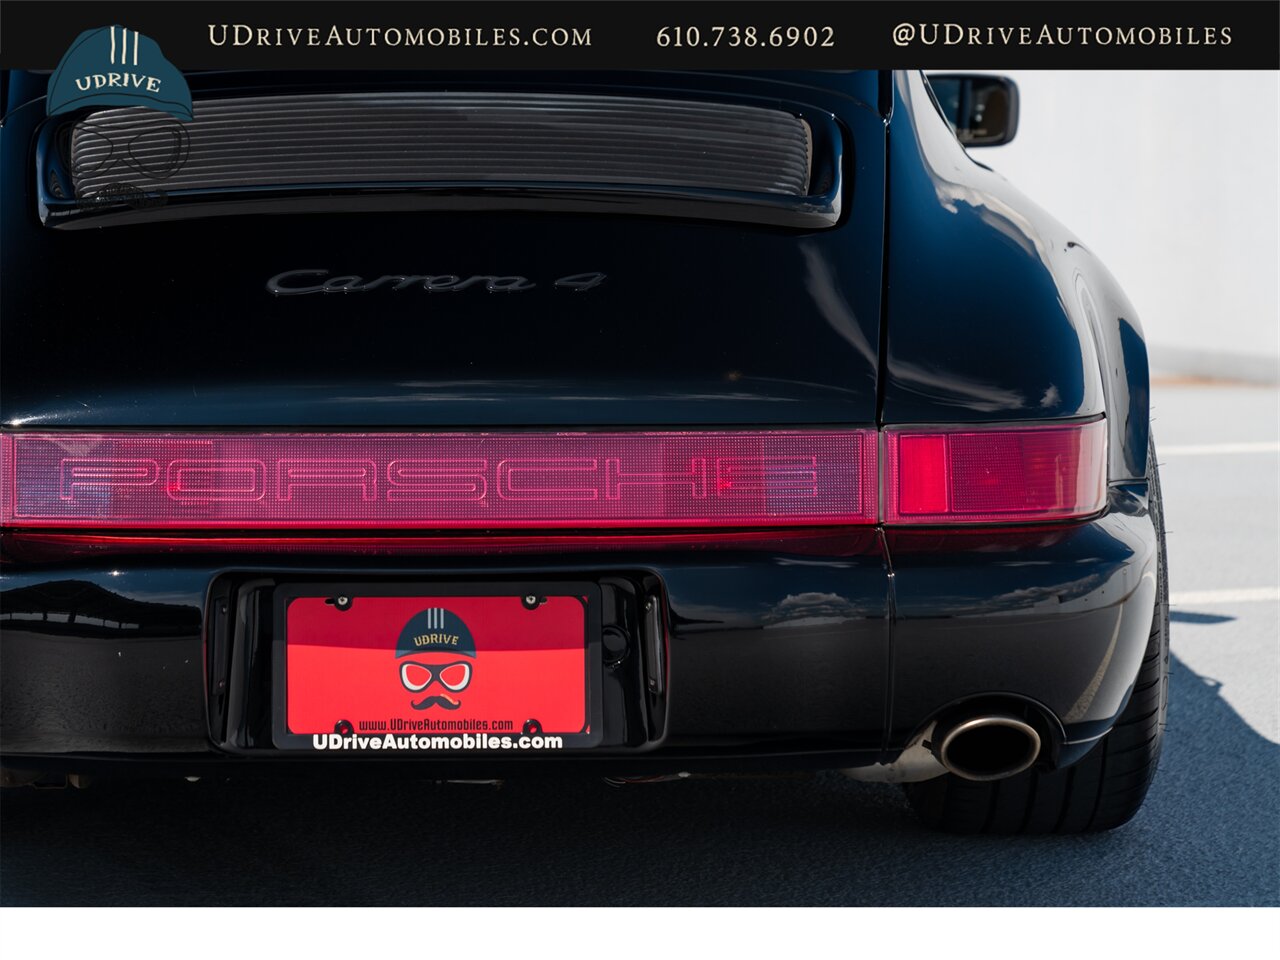 1989 Porsche 911 Carrera 4  964 C4 5 Speed Manual $63k Recent Service and Upgrades - Photo 26 - West Chester, PA 19382